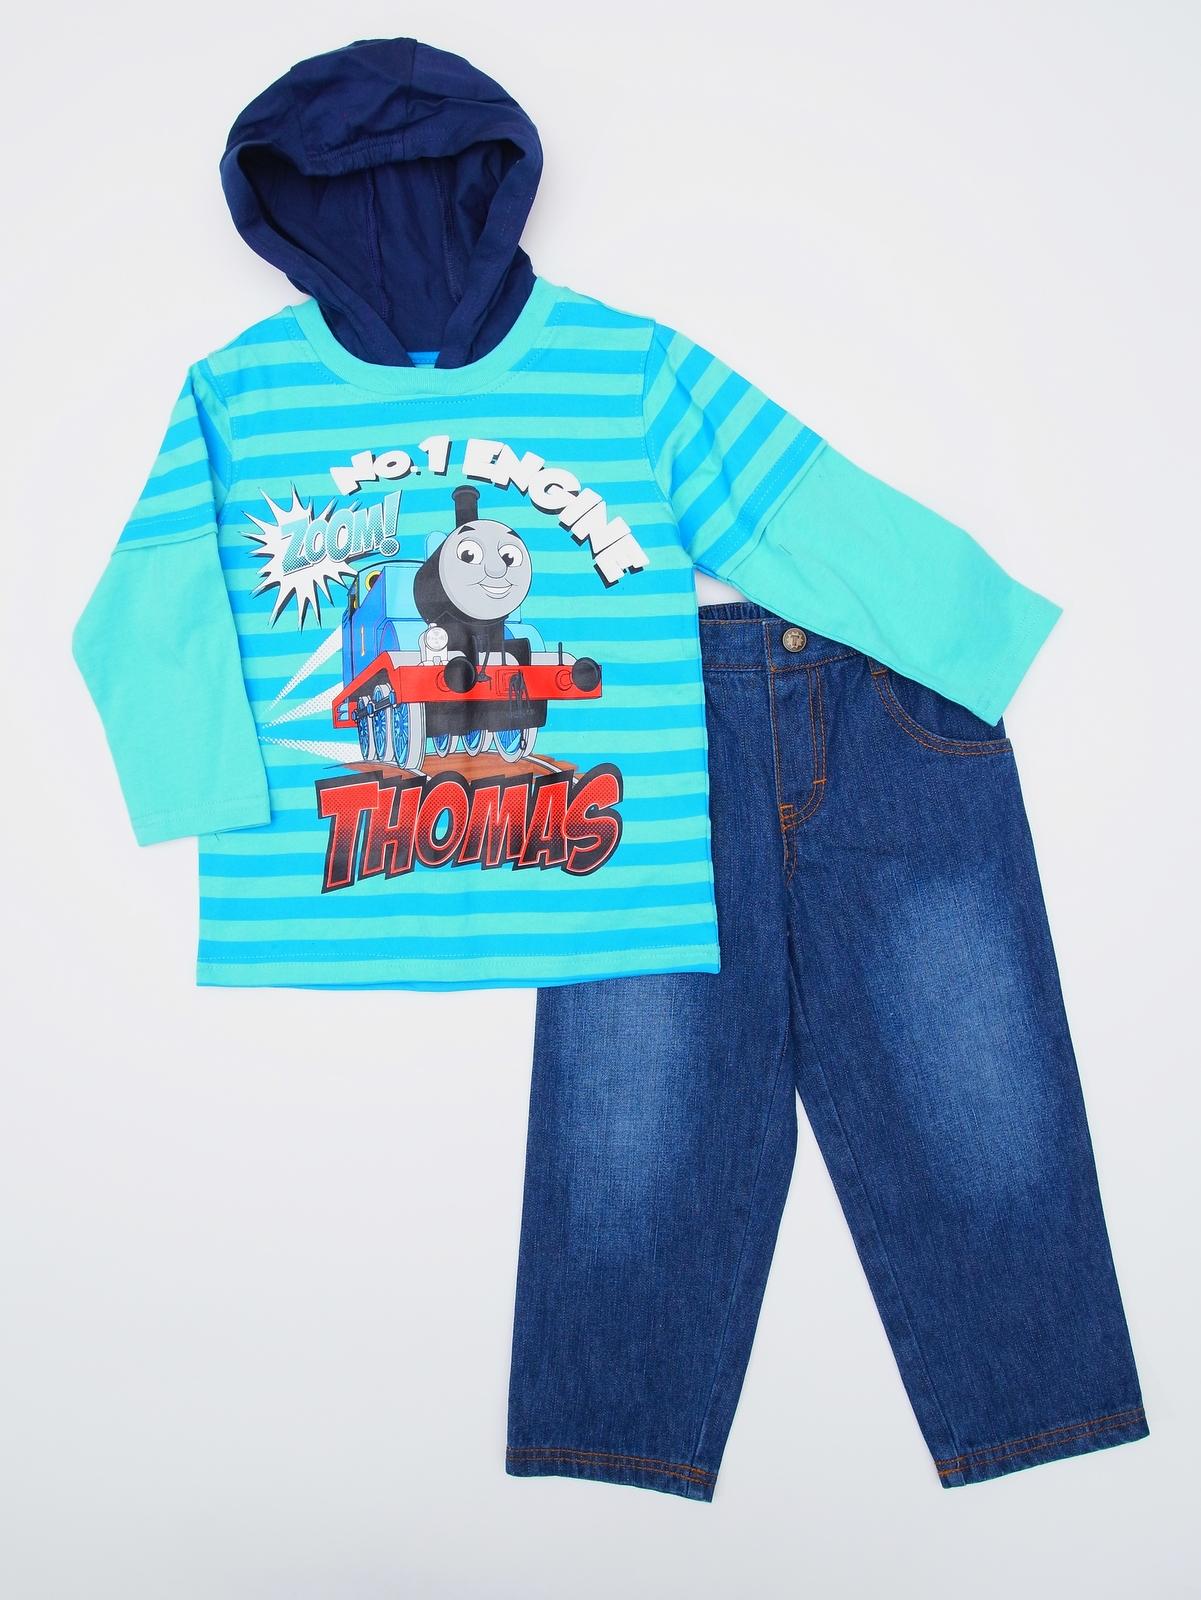 Thomas & Friends Infant & Toddler Boy's Hooded Shirt & Jeans